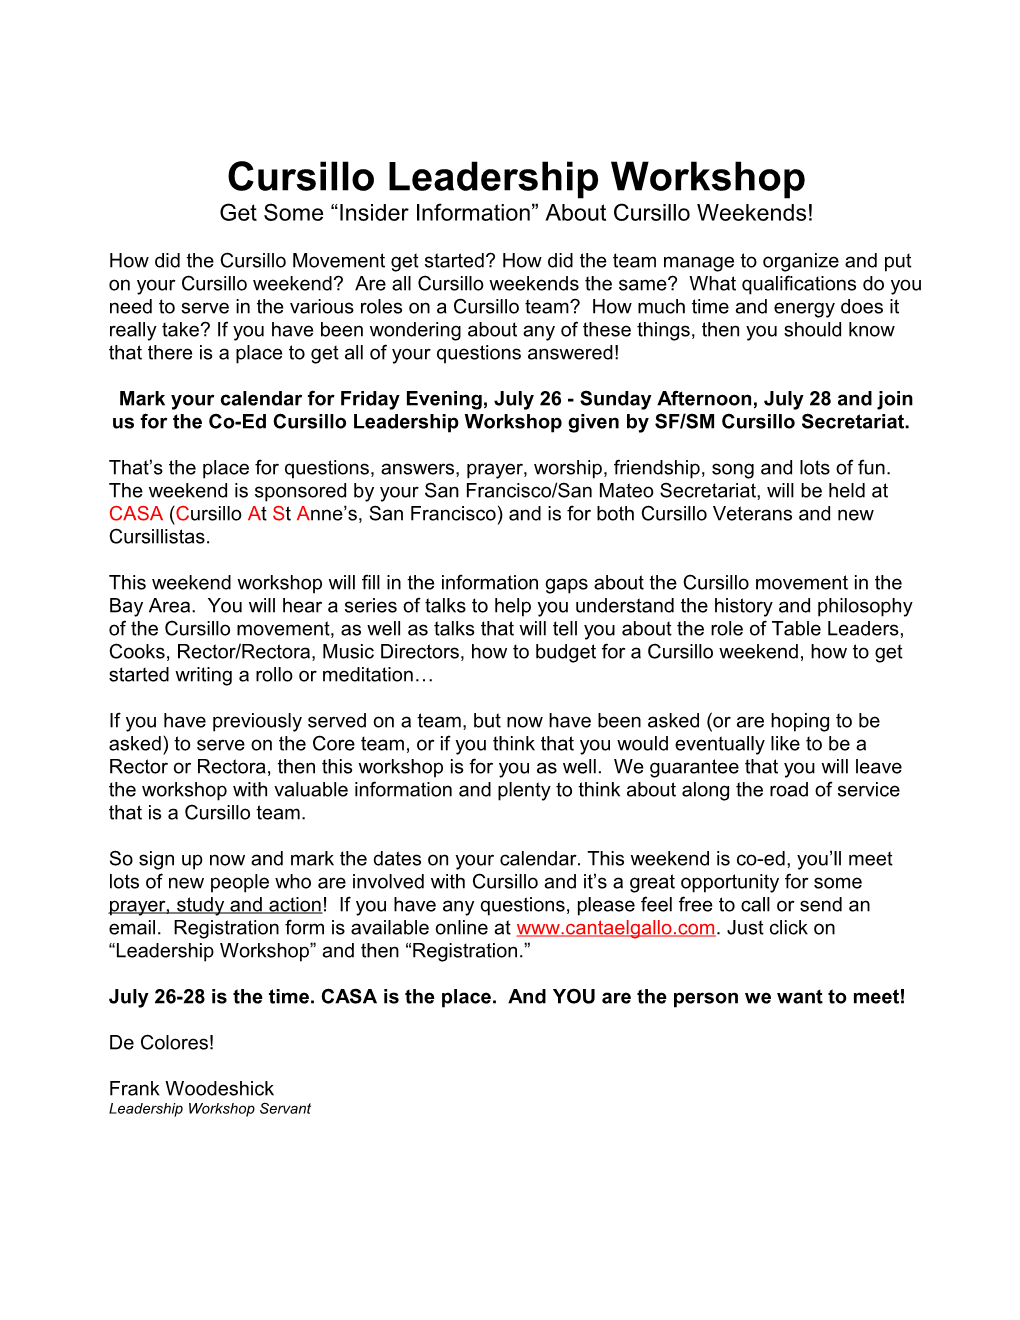 Get Some Insider Information About Cursillo Weekends